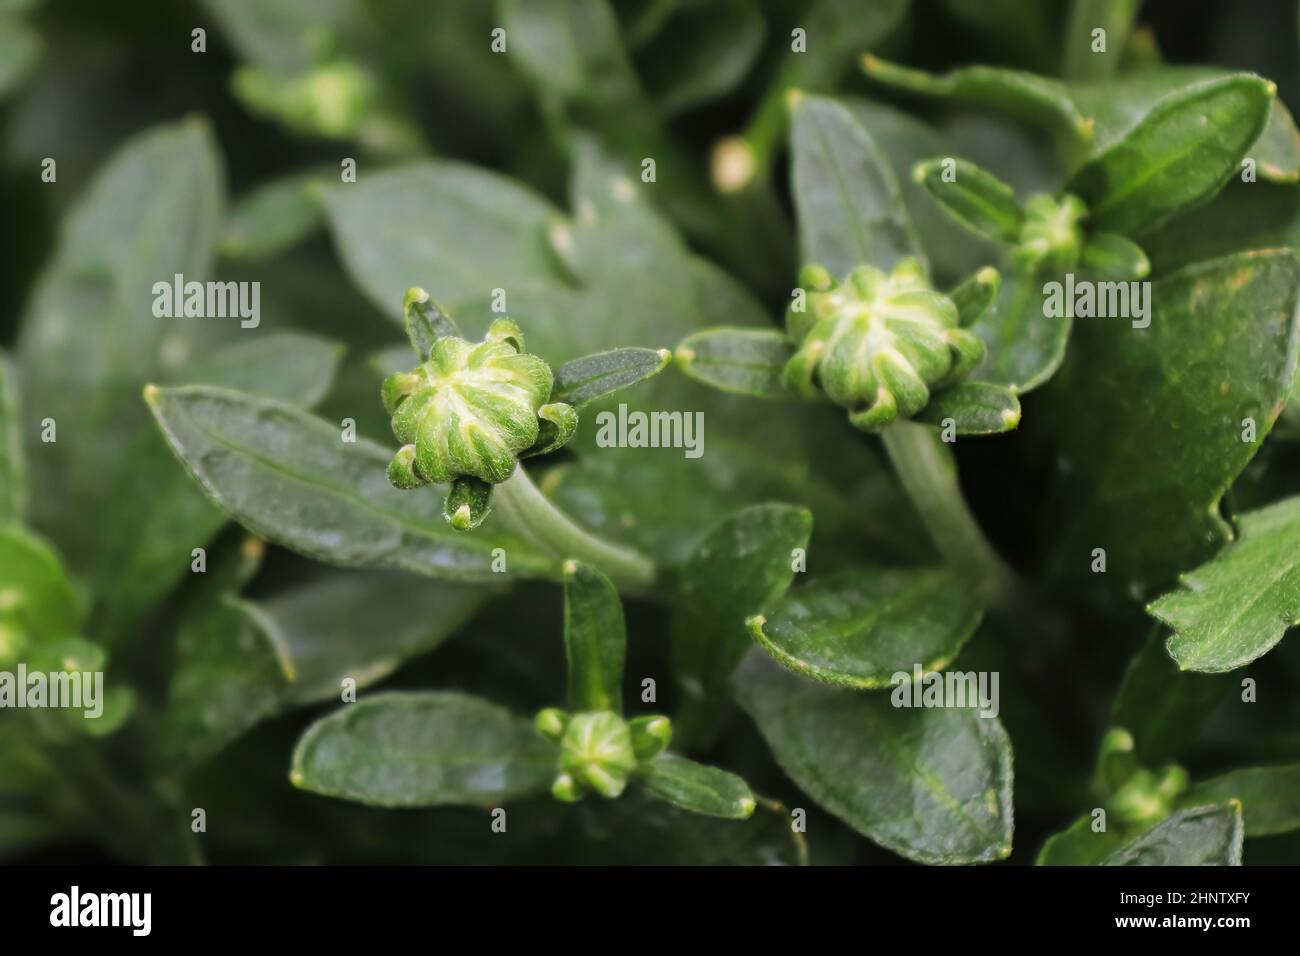 View of budding garden mums between leaves. Stock Photo